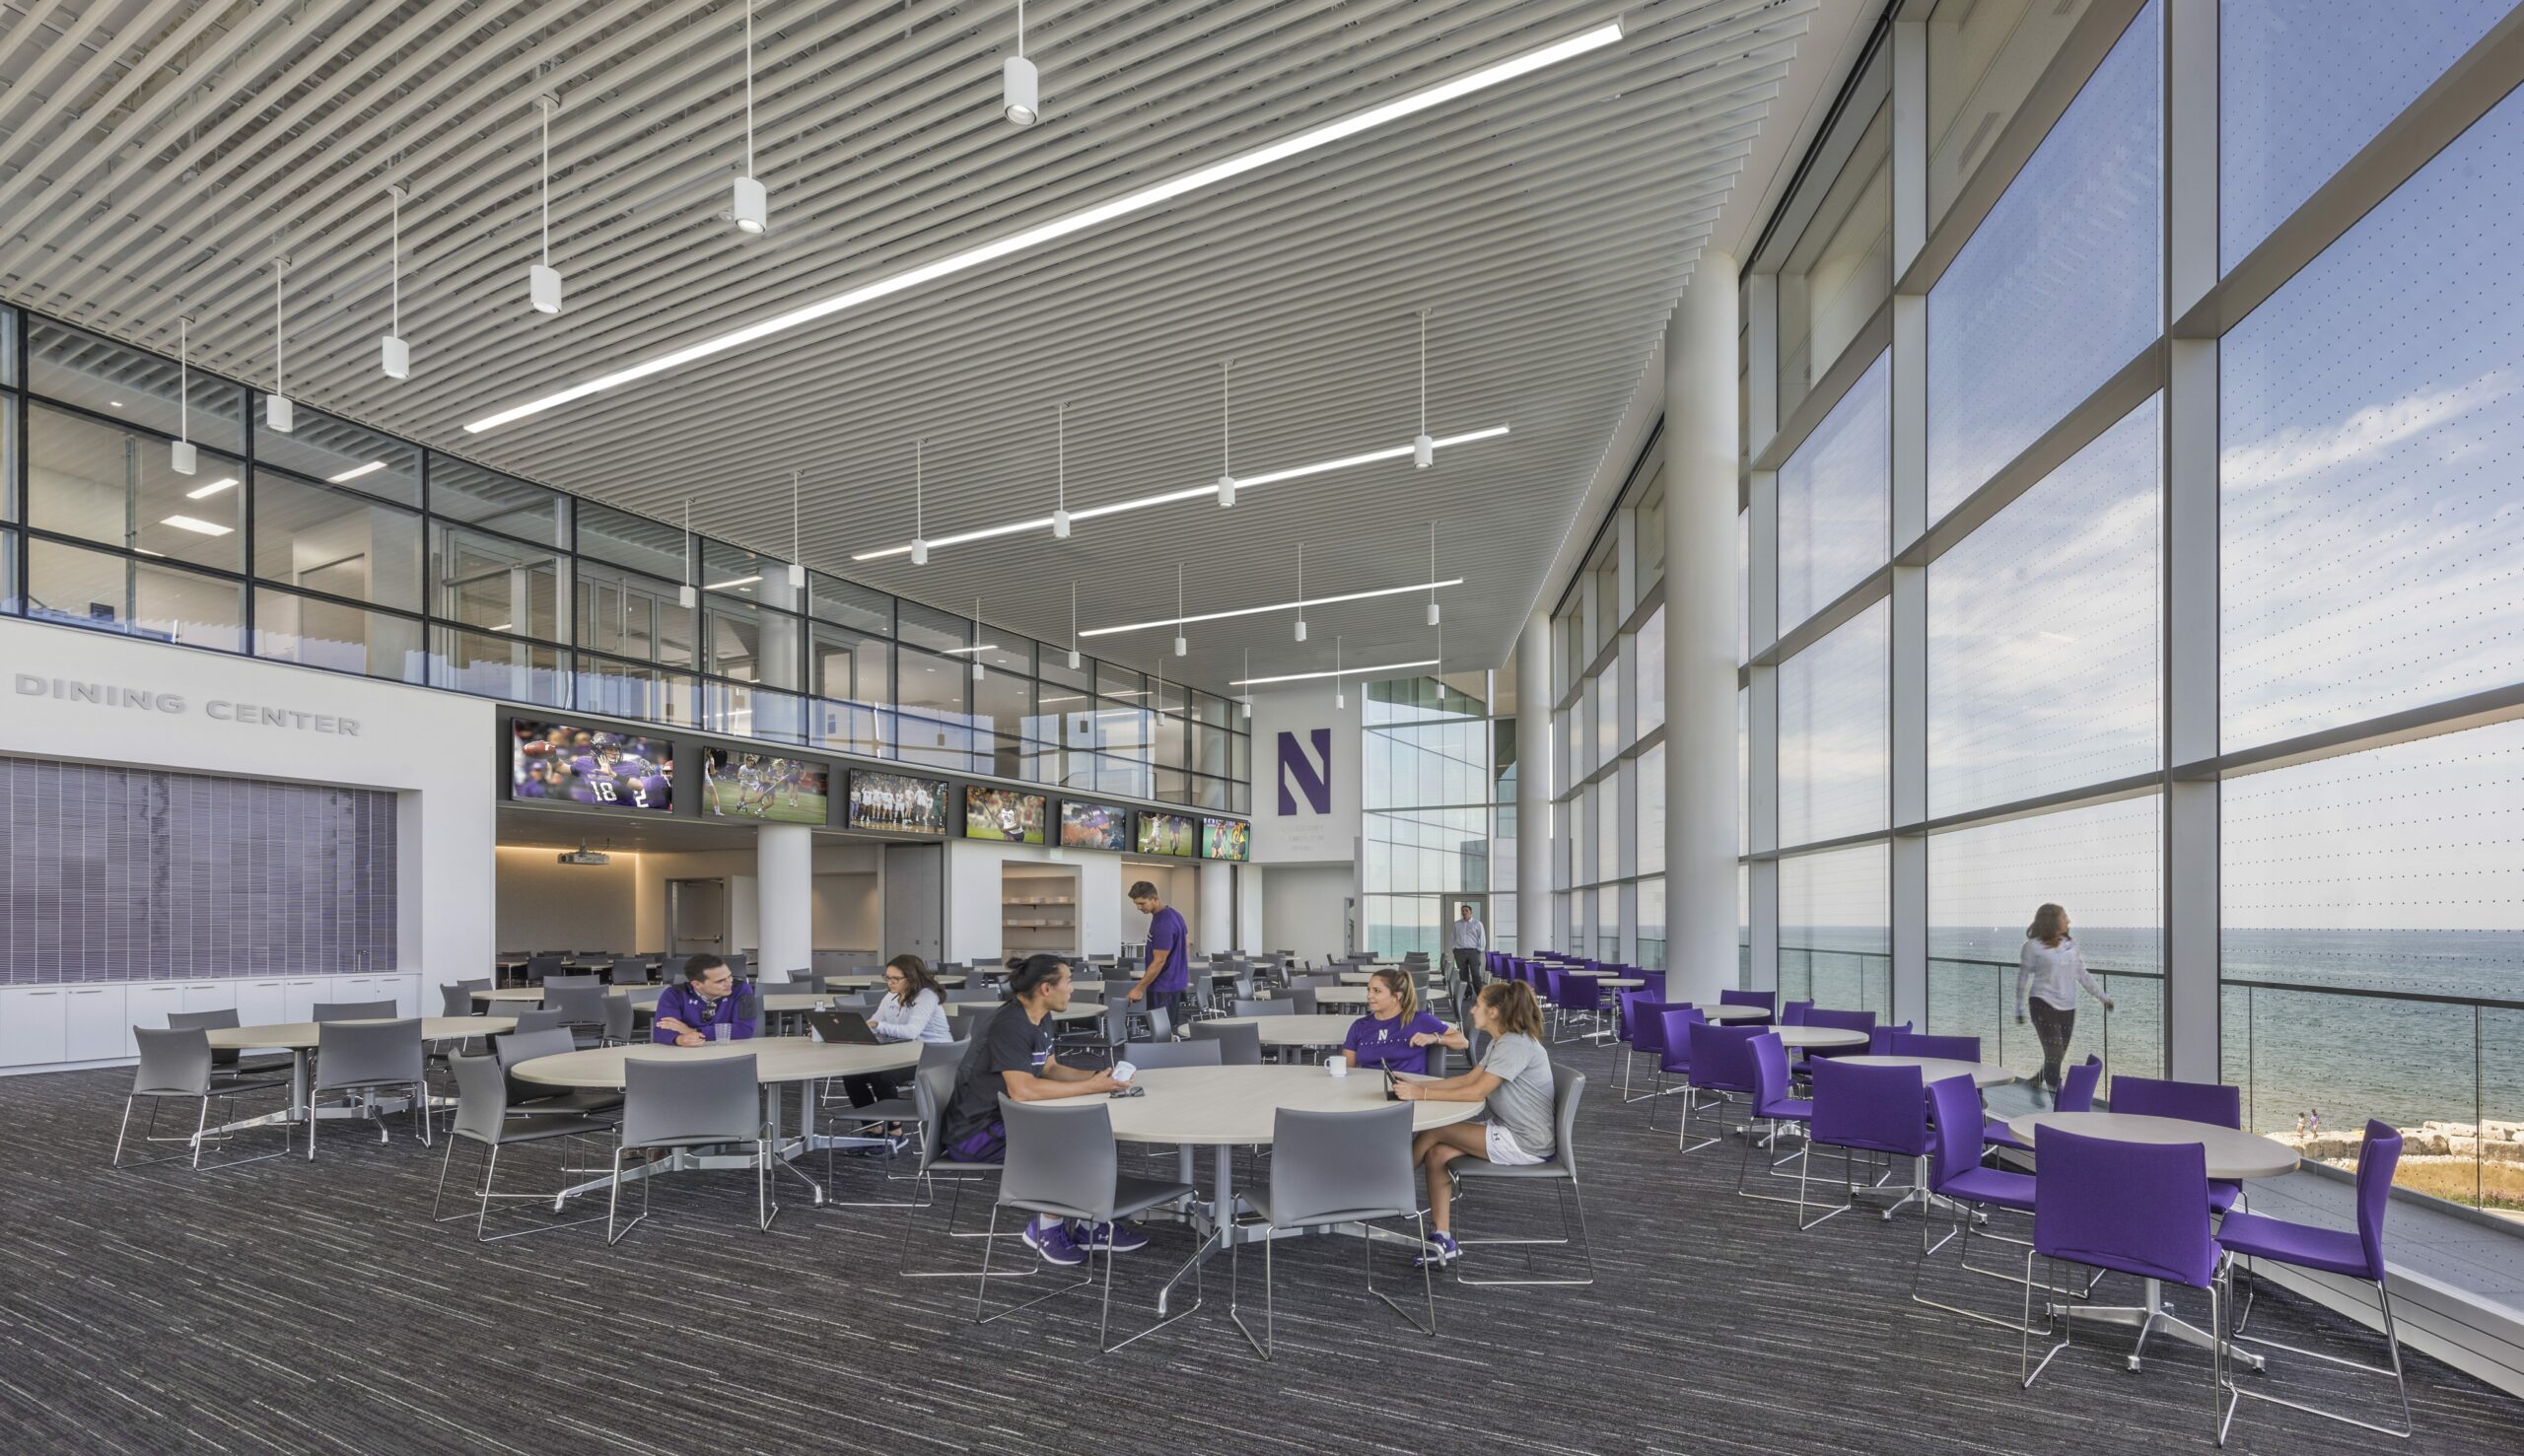 Tables and purple chairs in dining facility